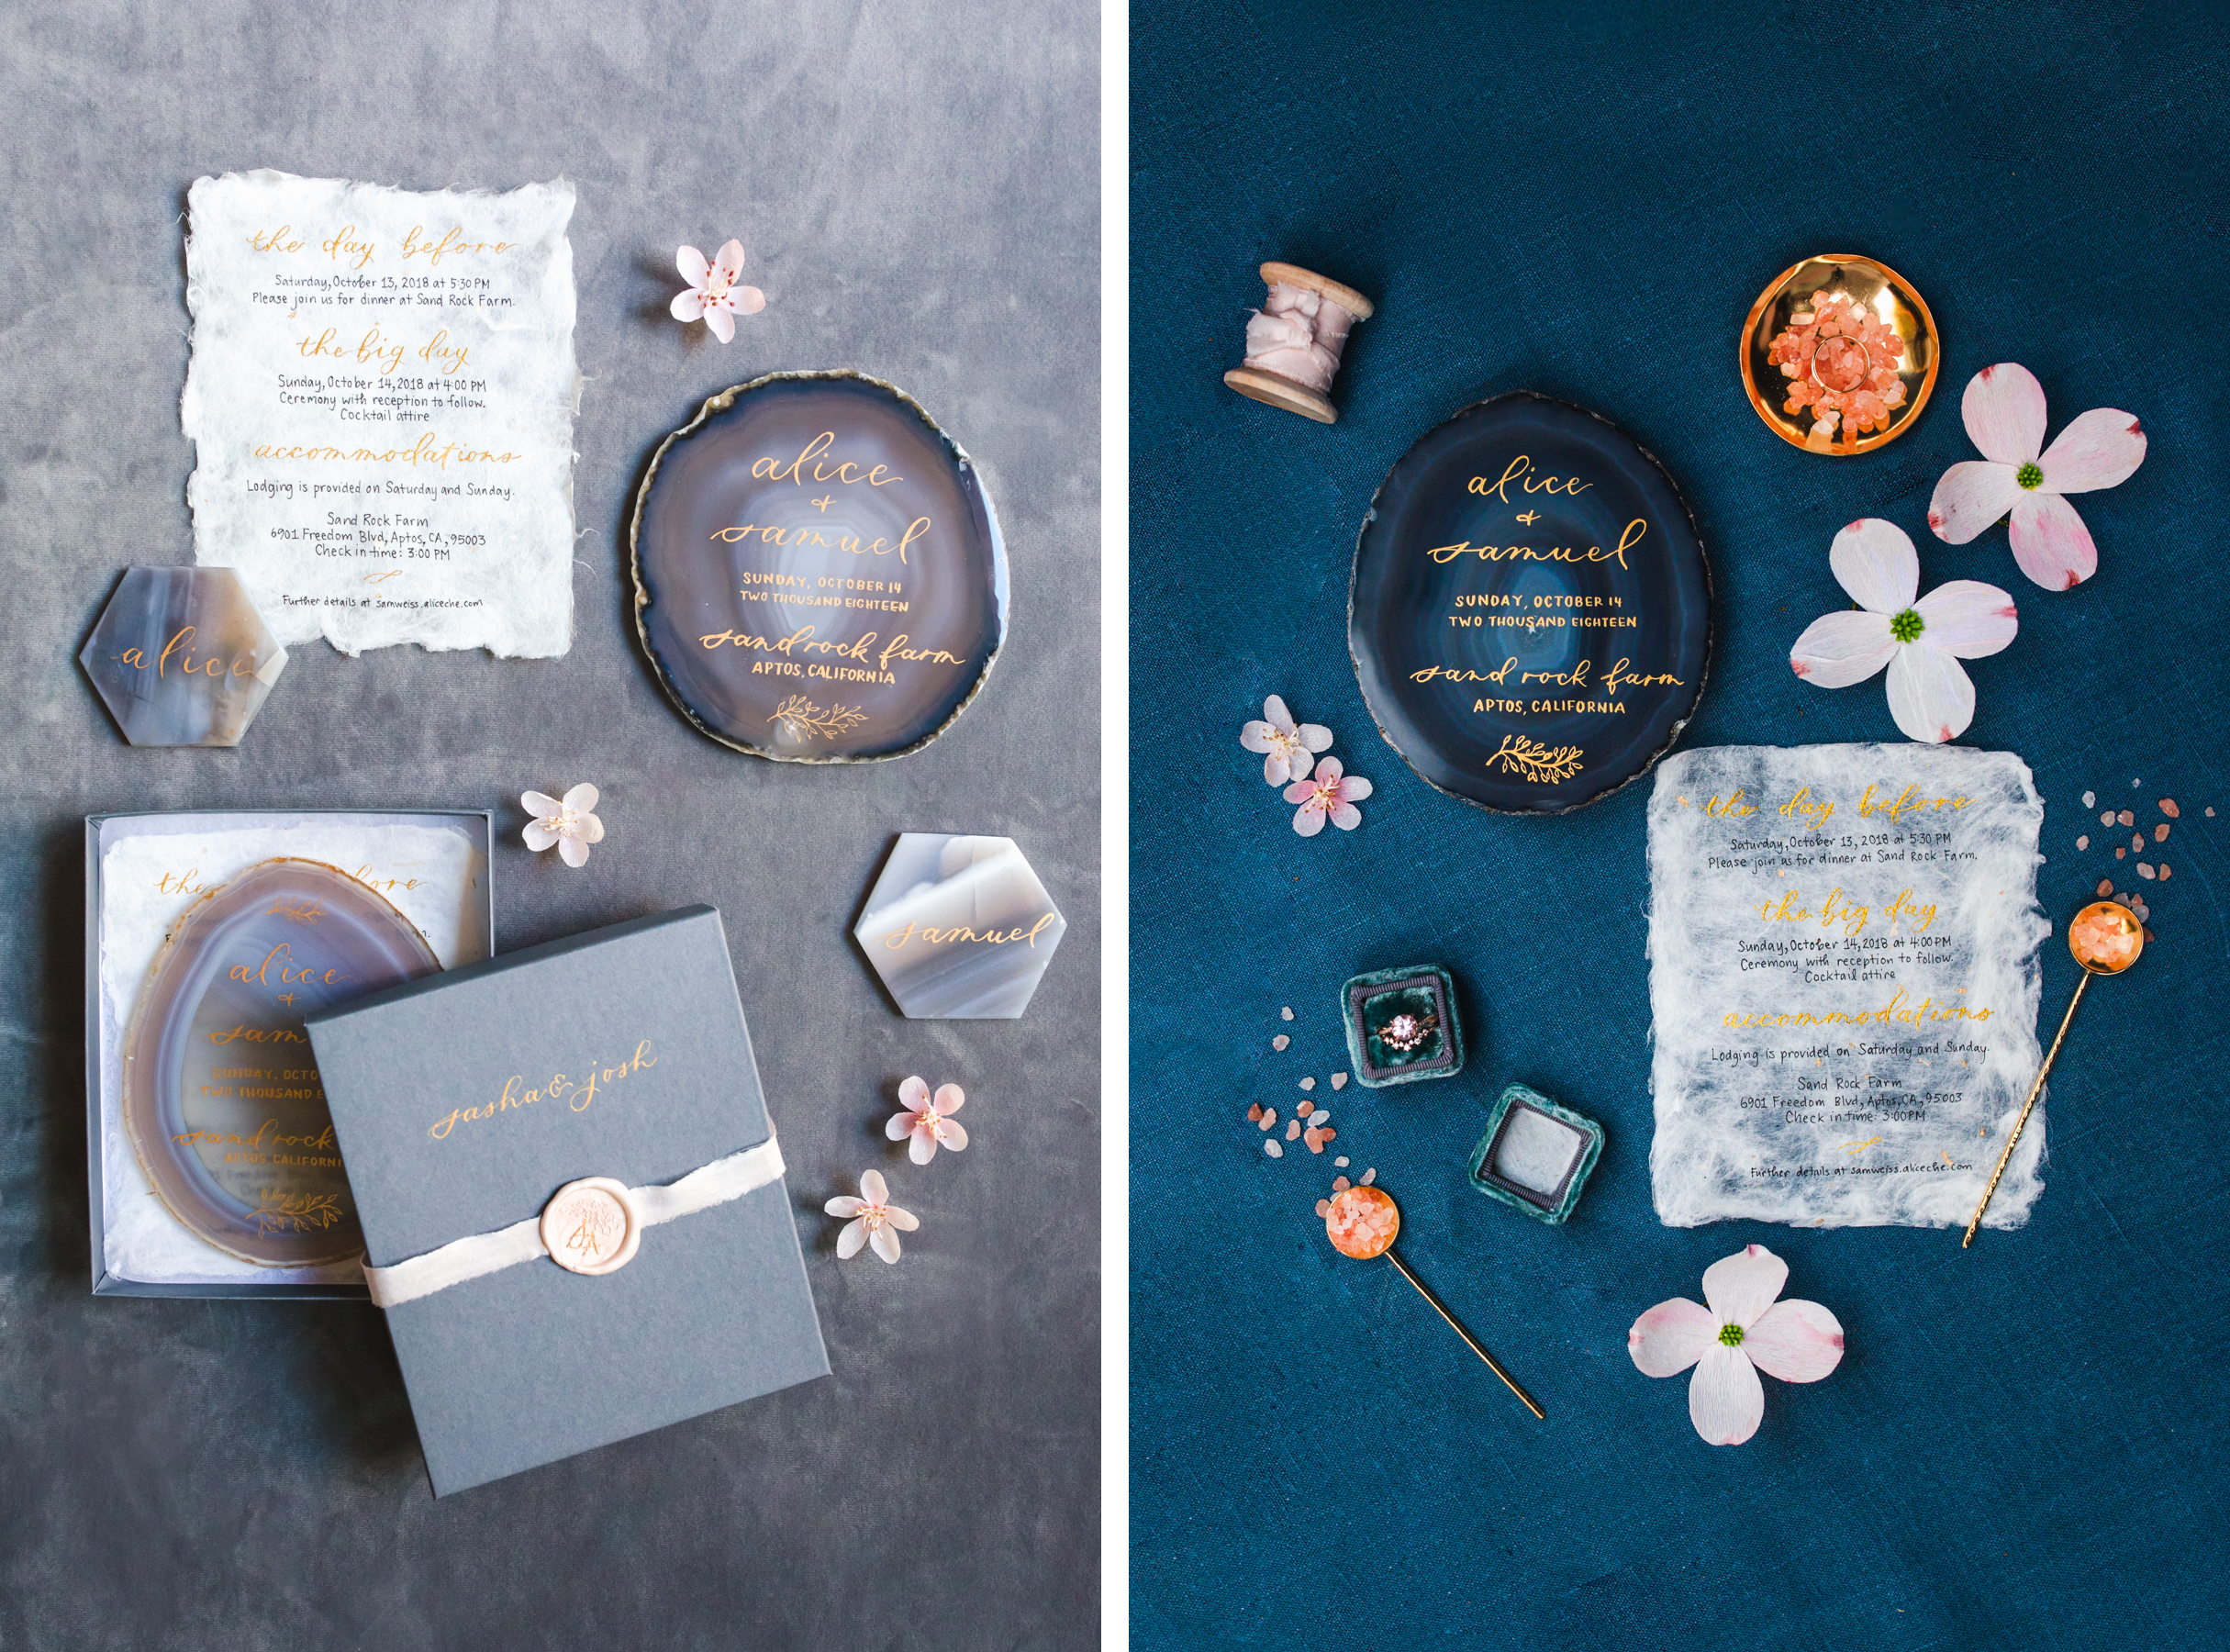 DIY agate slice wedding invitation with paper flowers